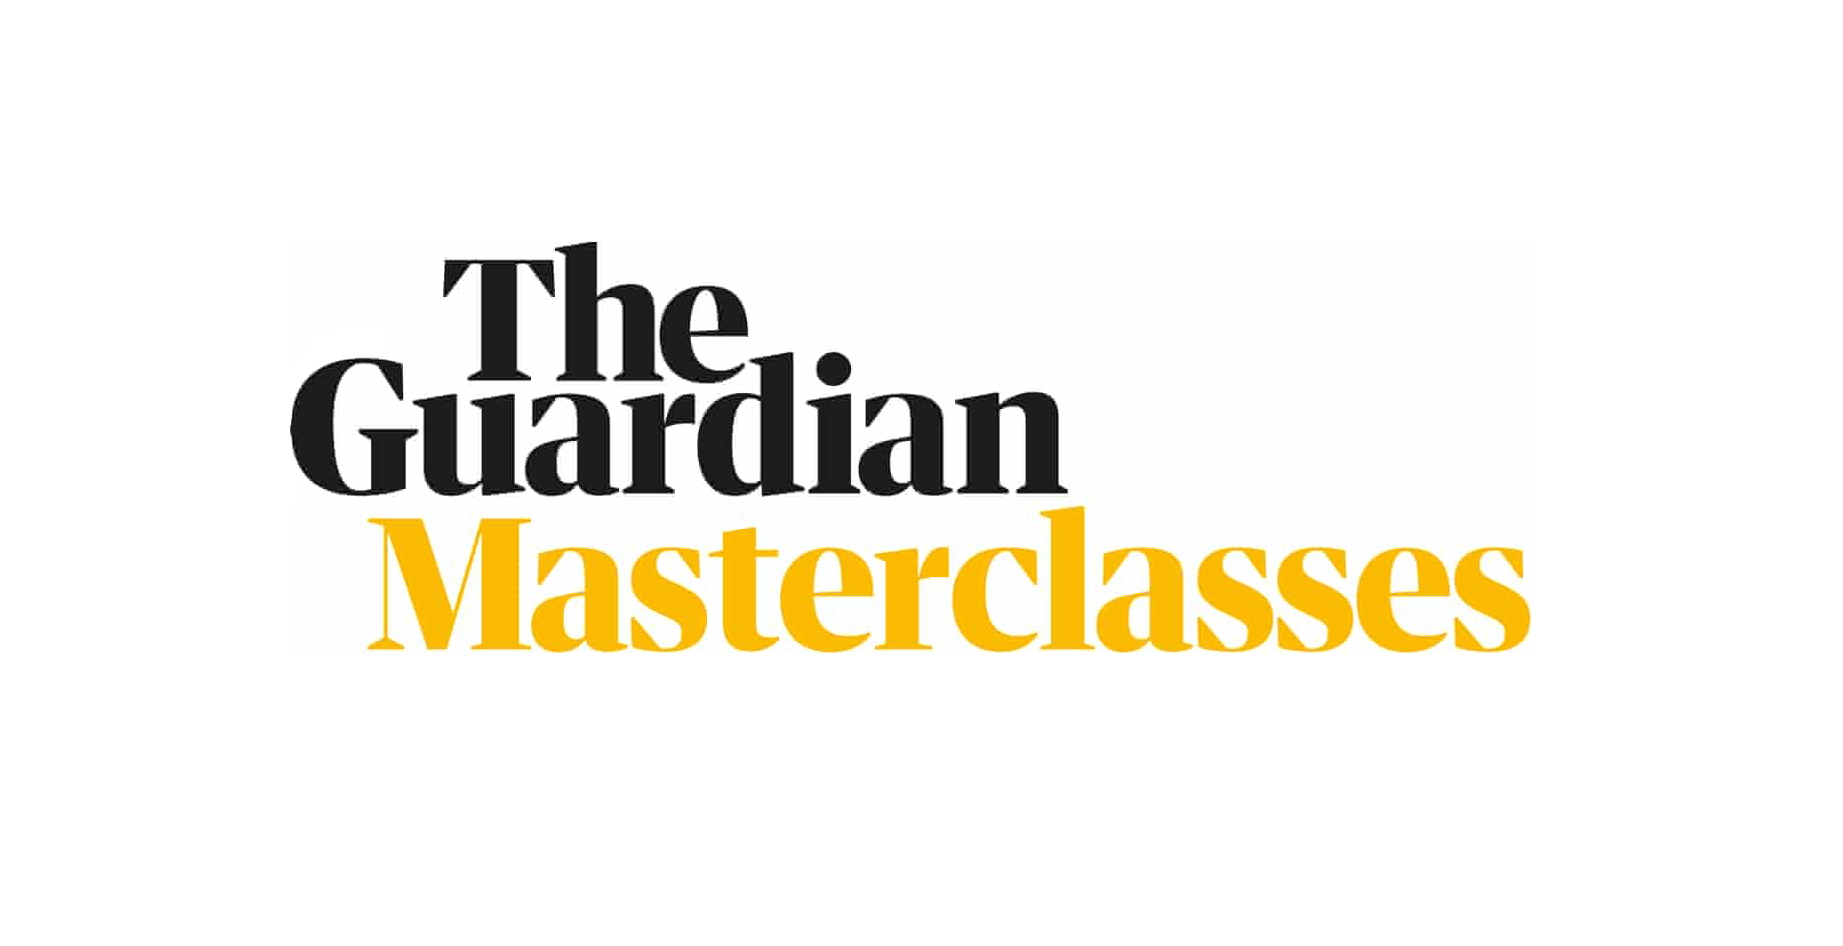 Dominique Antiglio at The Guardian Master Class – New year, new you: Make 2020 your best year yet